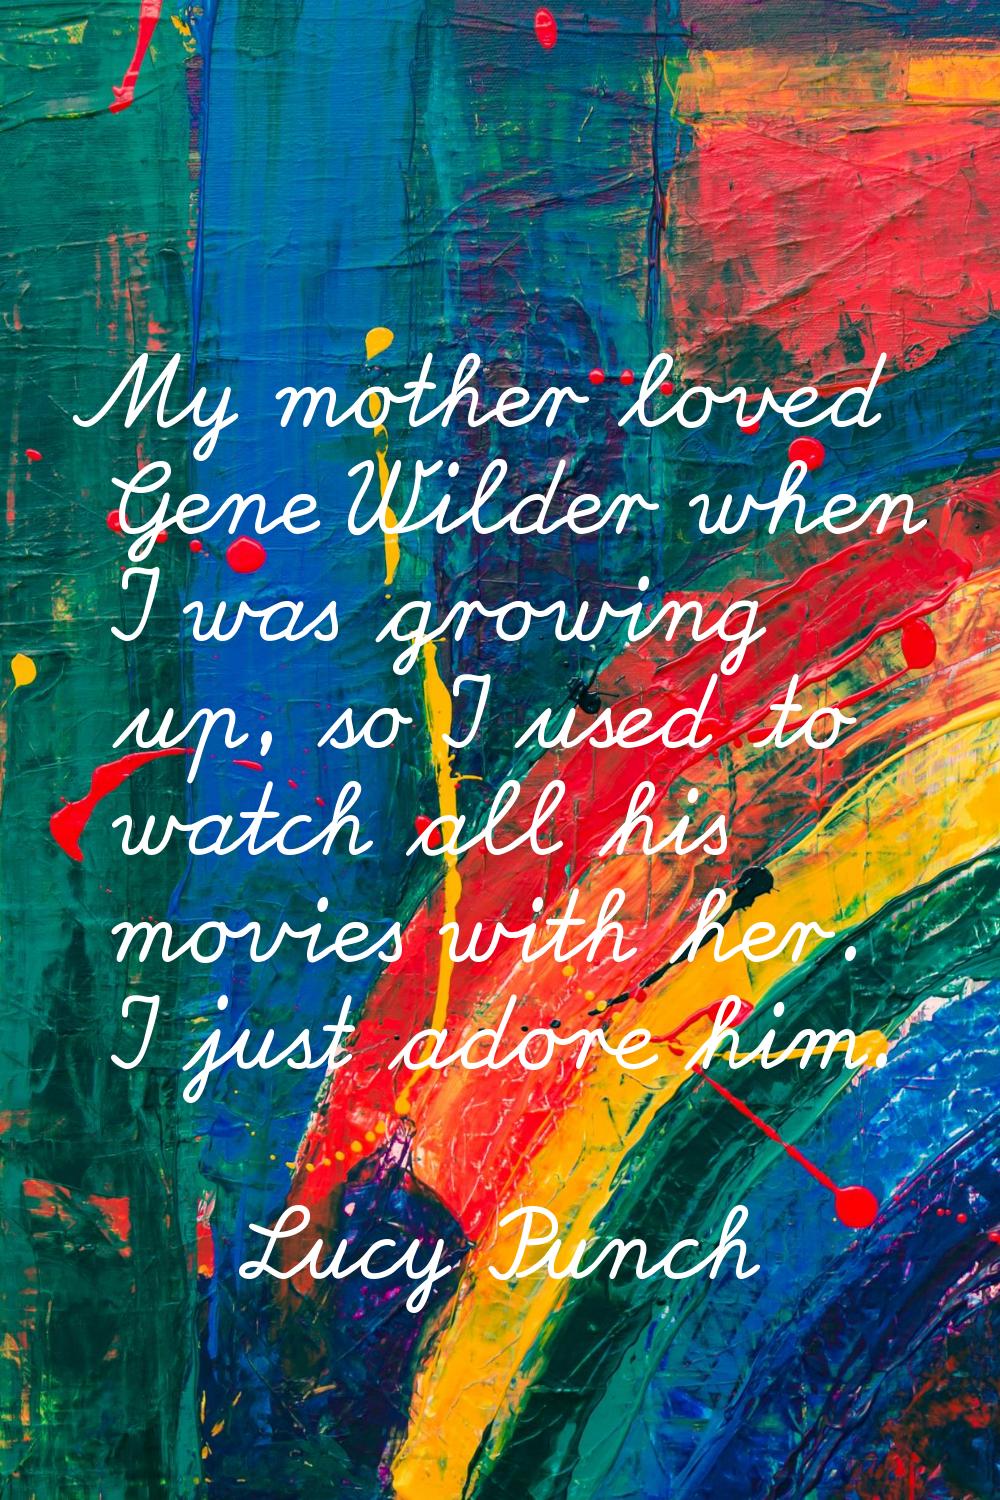 My mother loved Gene Wilder when I was growing up, so I used to watch all his movies with her. I ju